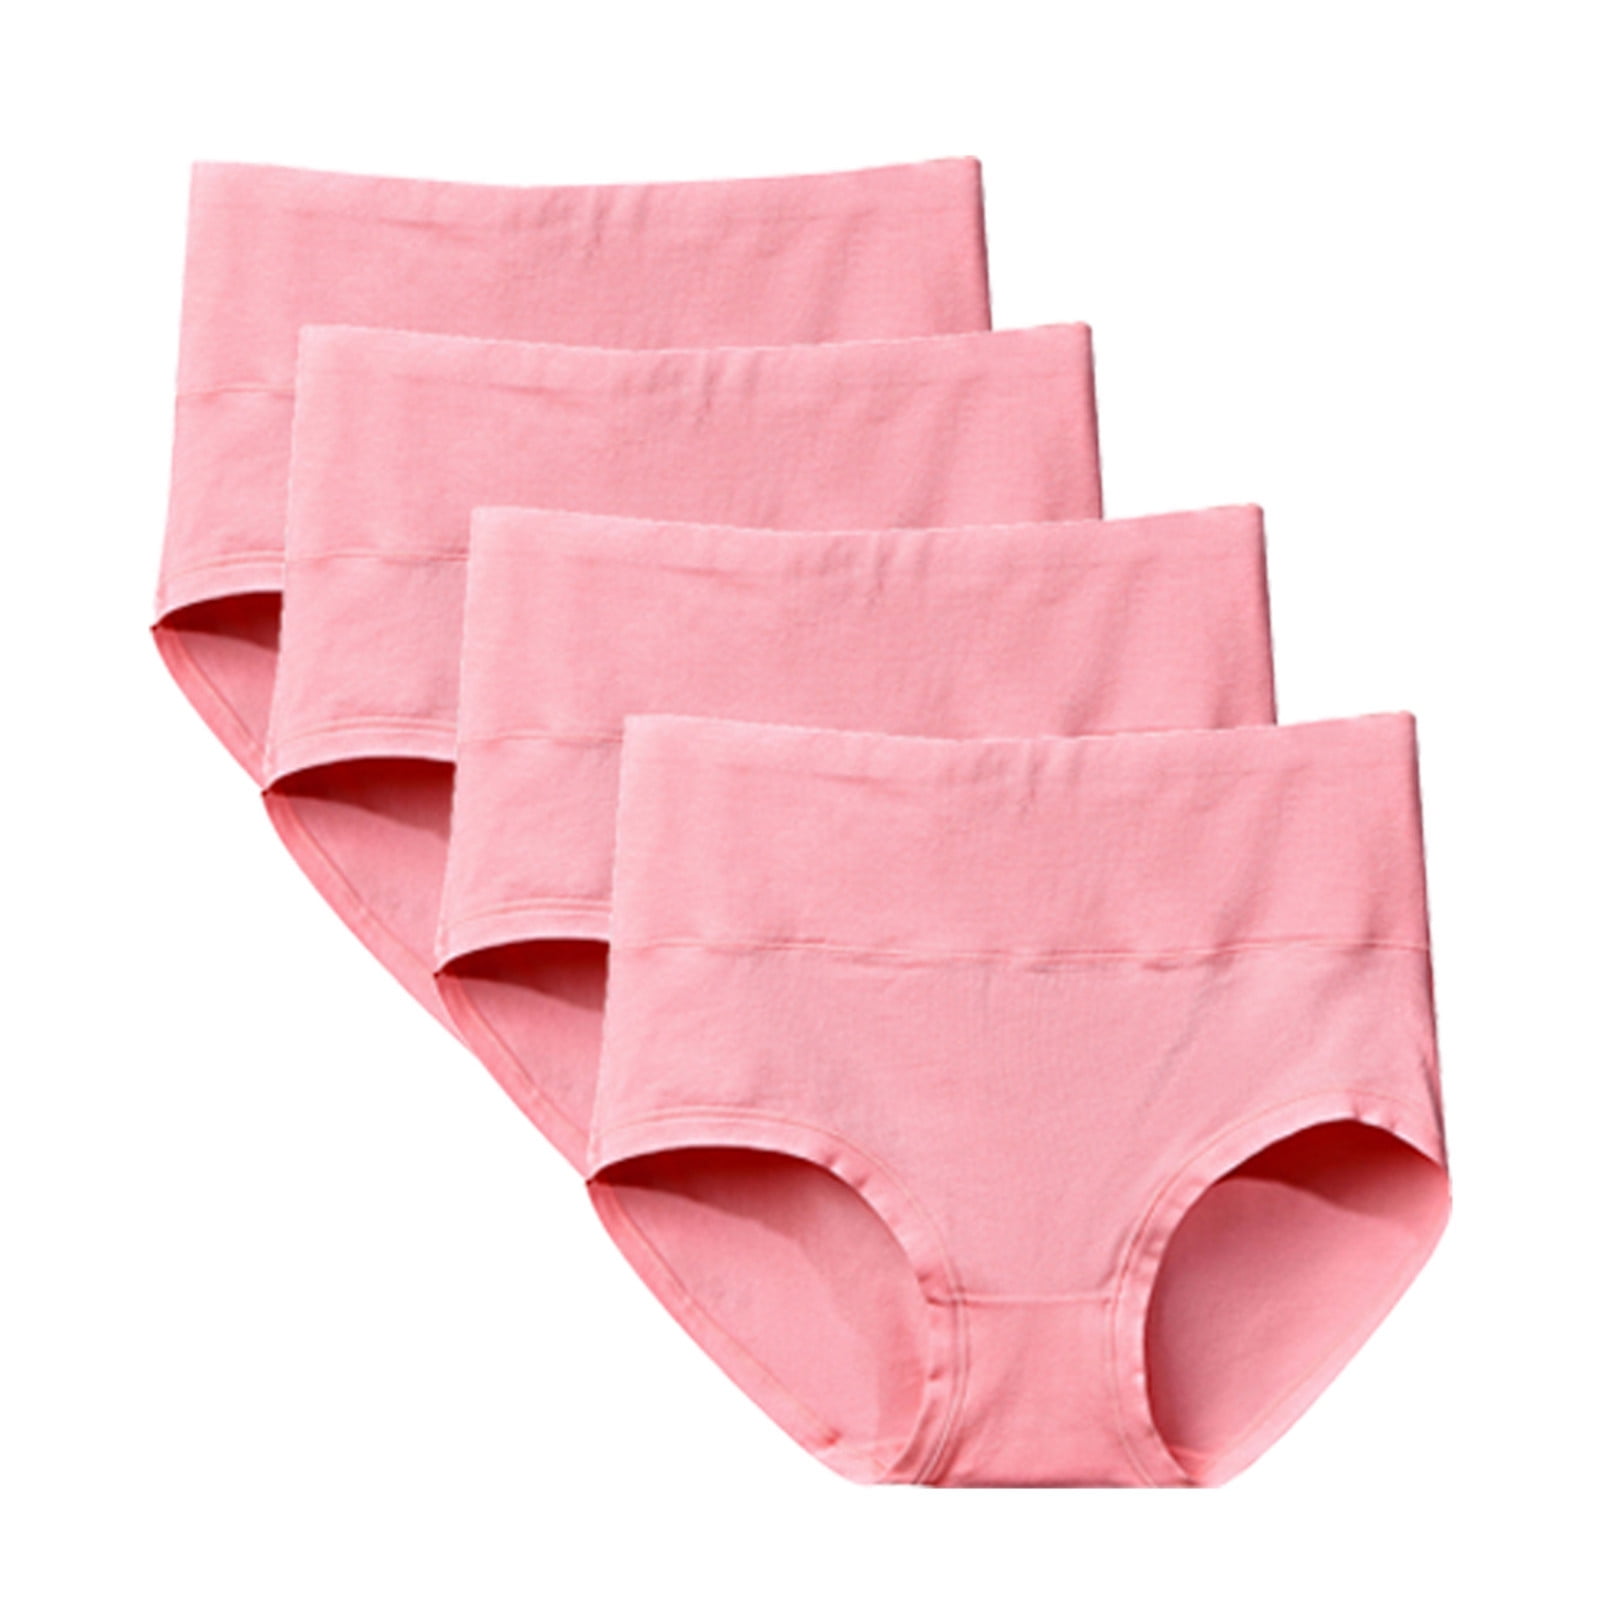 INNERSY Women's Plus Size XL-5XL Cotton Underwear High Waisted Briefs  Panties 4-Pack (XL,Spring Lake)